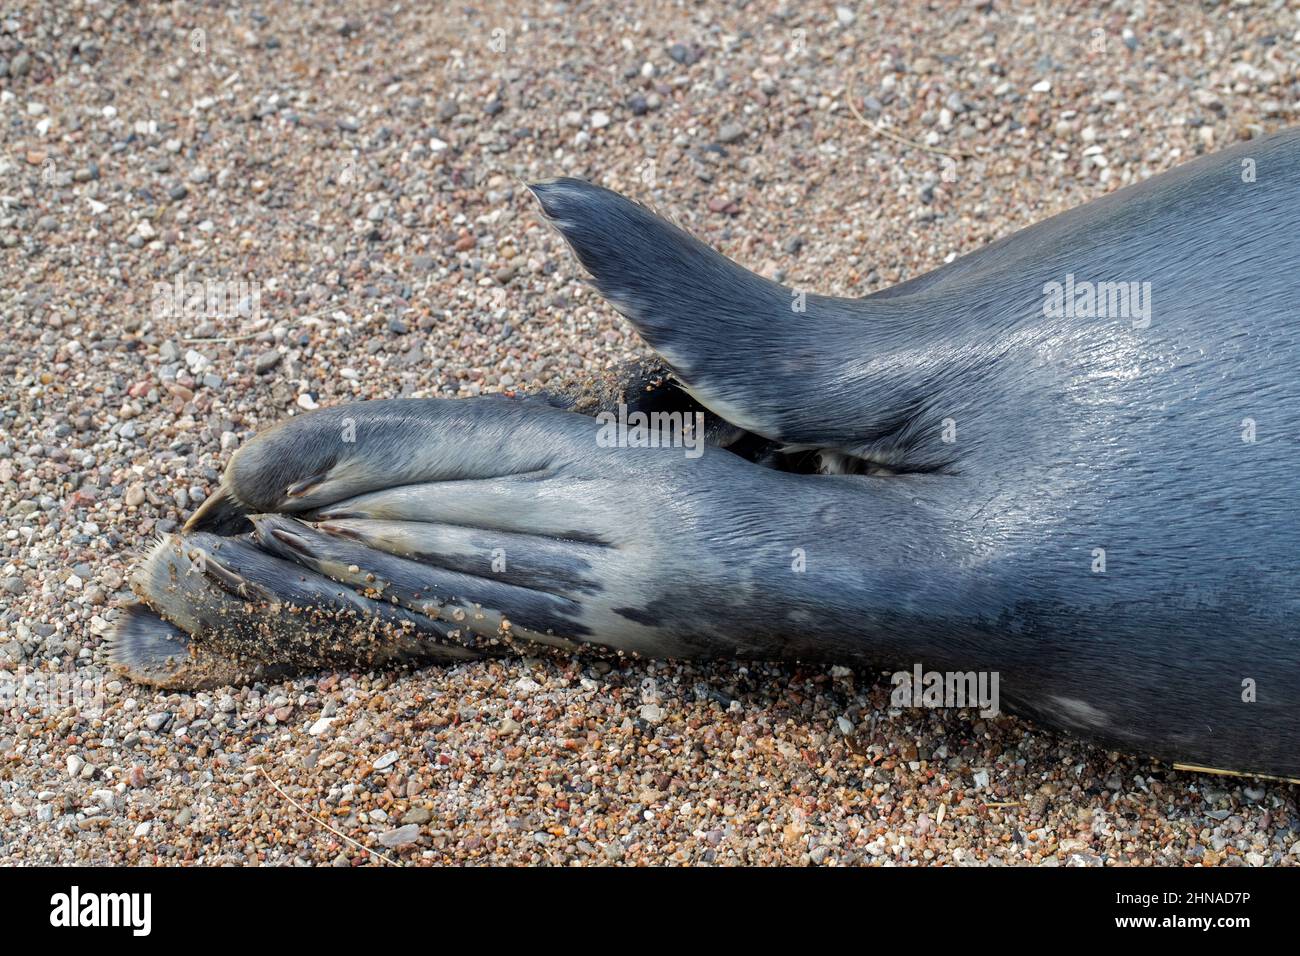 Grey seal / gray seal (Halichoerus grypus) close-up of rear flipper with claws and tail on the beach Stock Photo